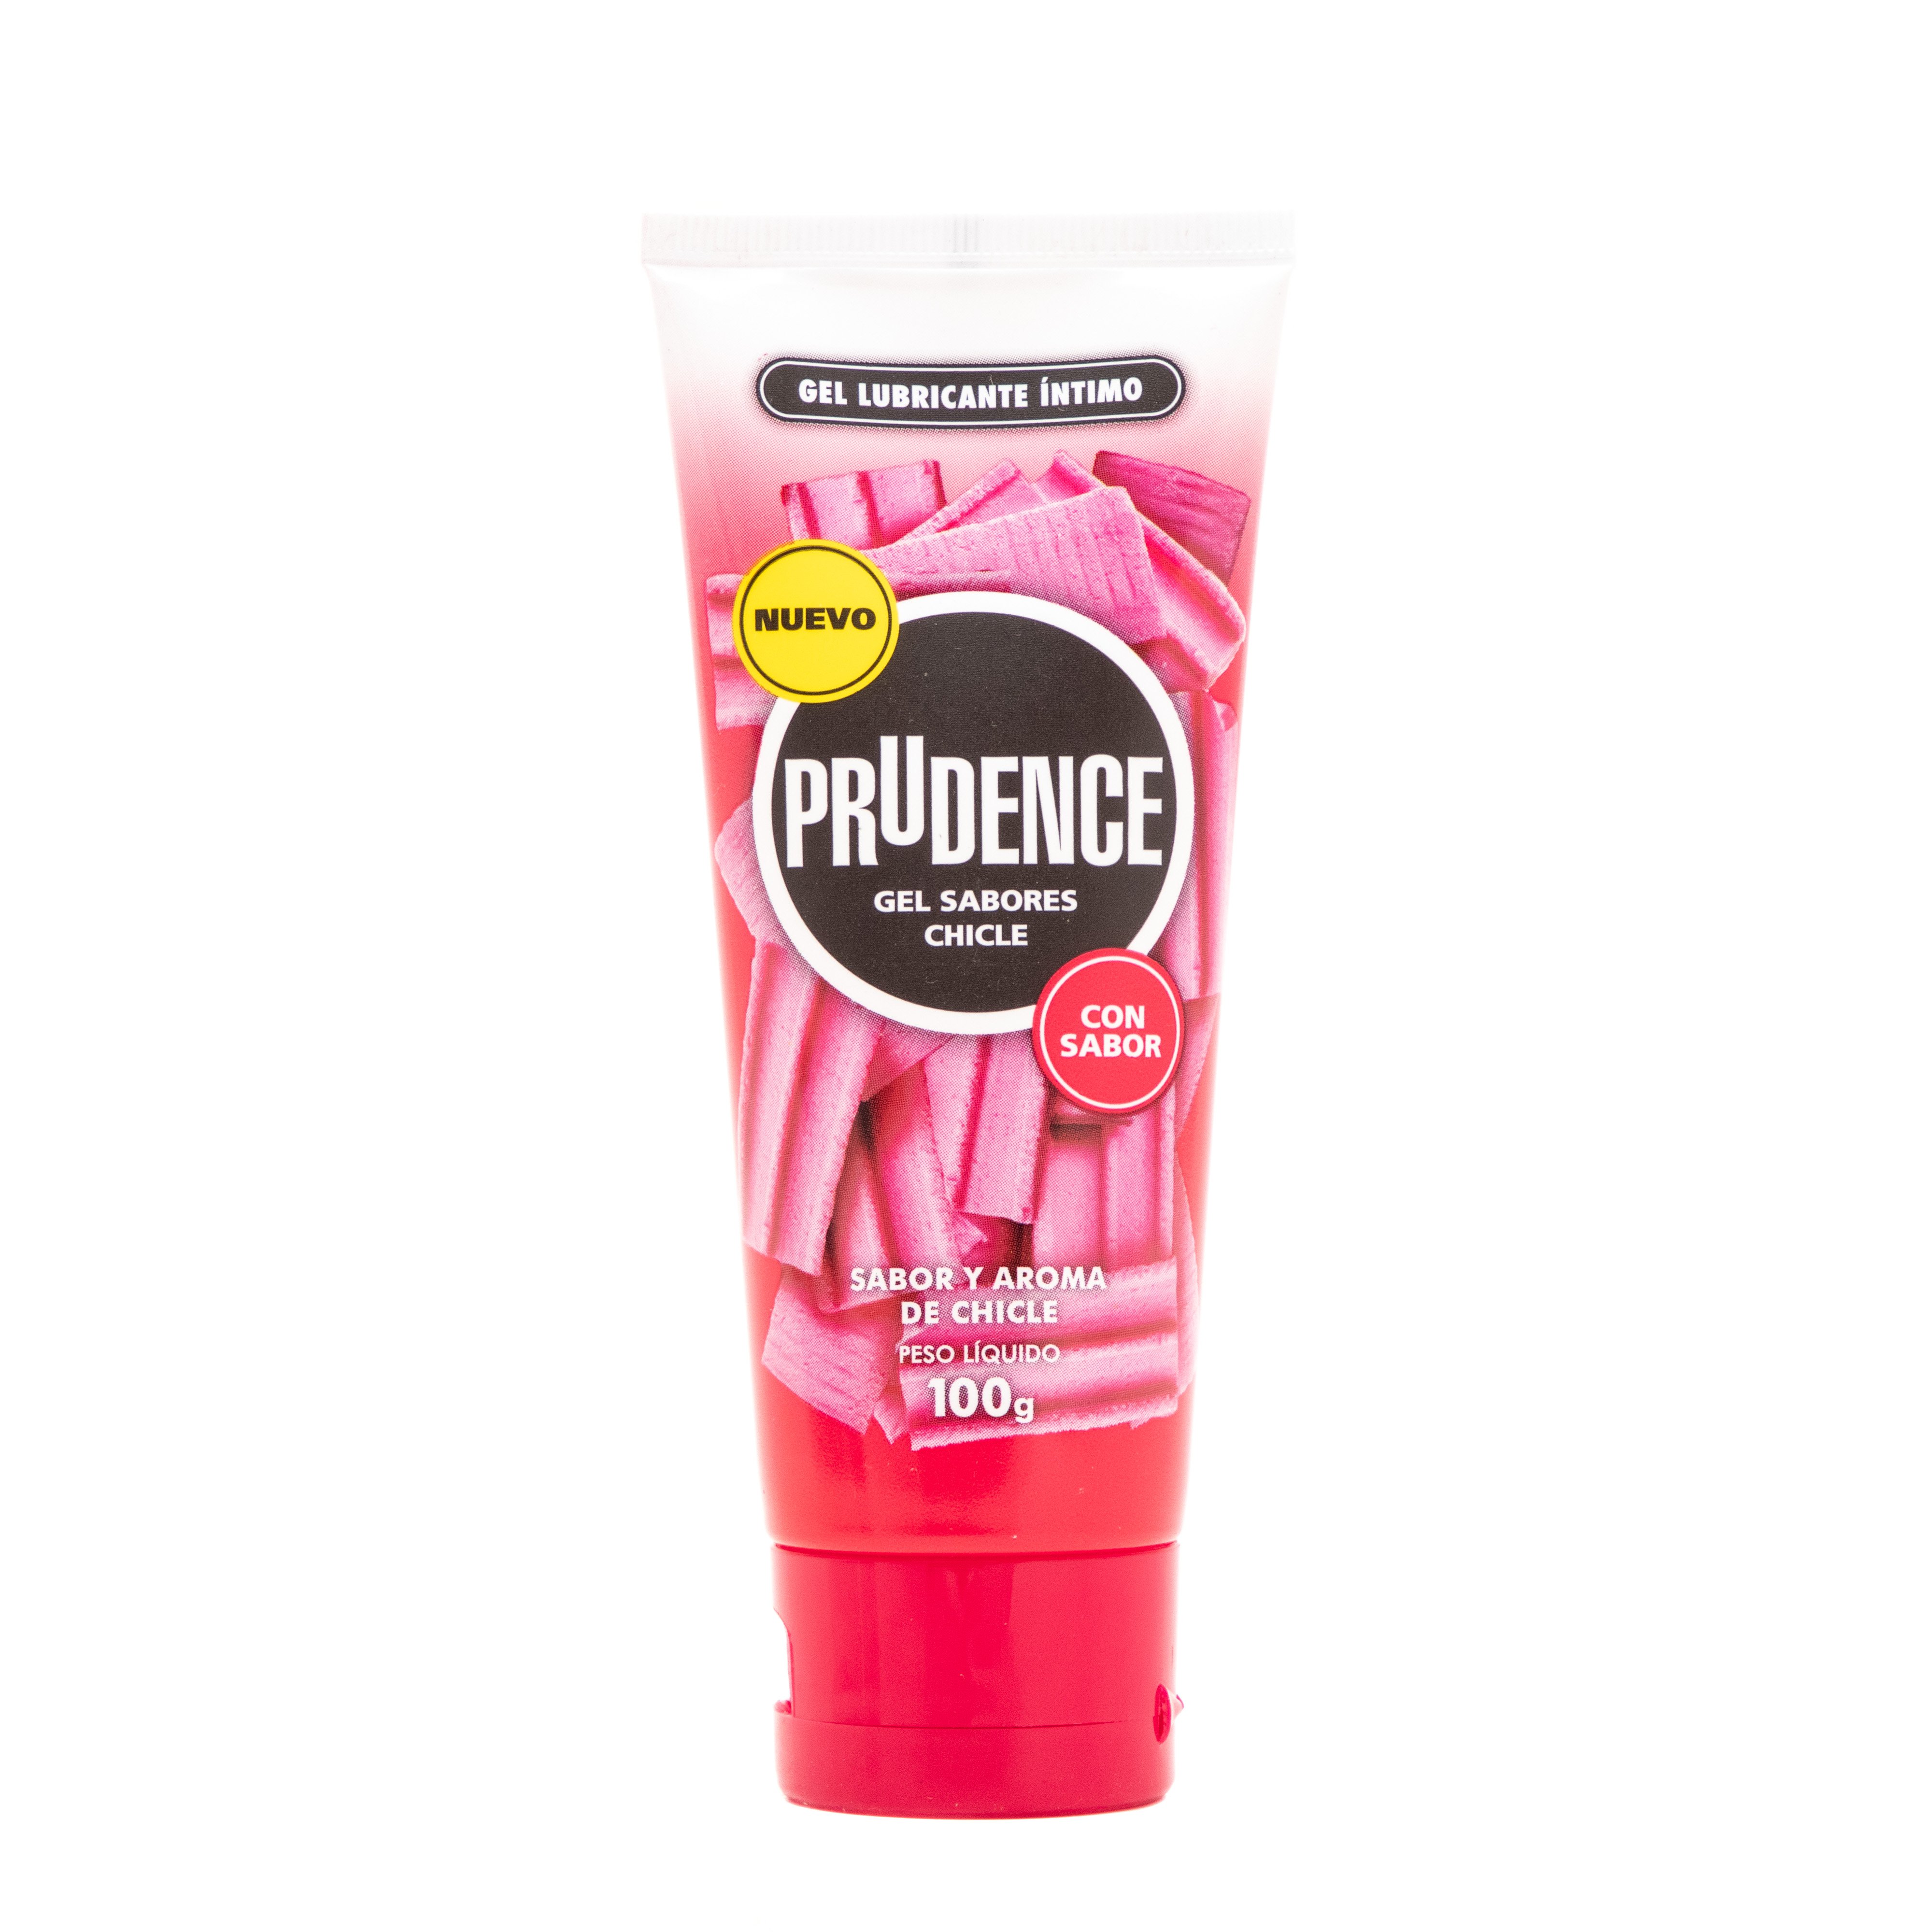 PRUDENCE GEL LUBRICANTE 100G CHICLE